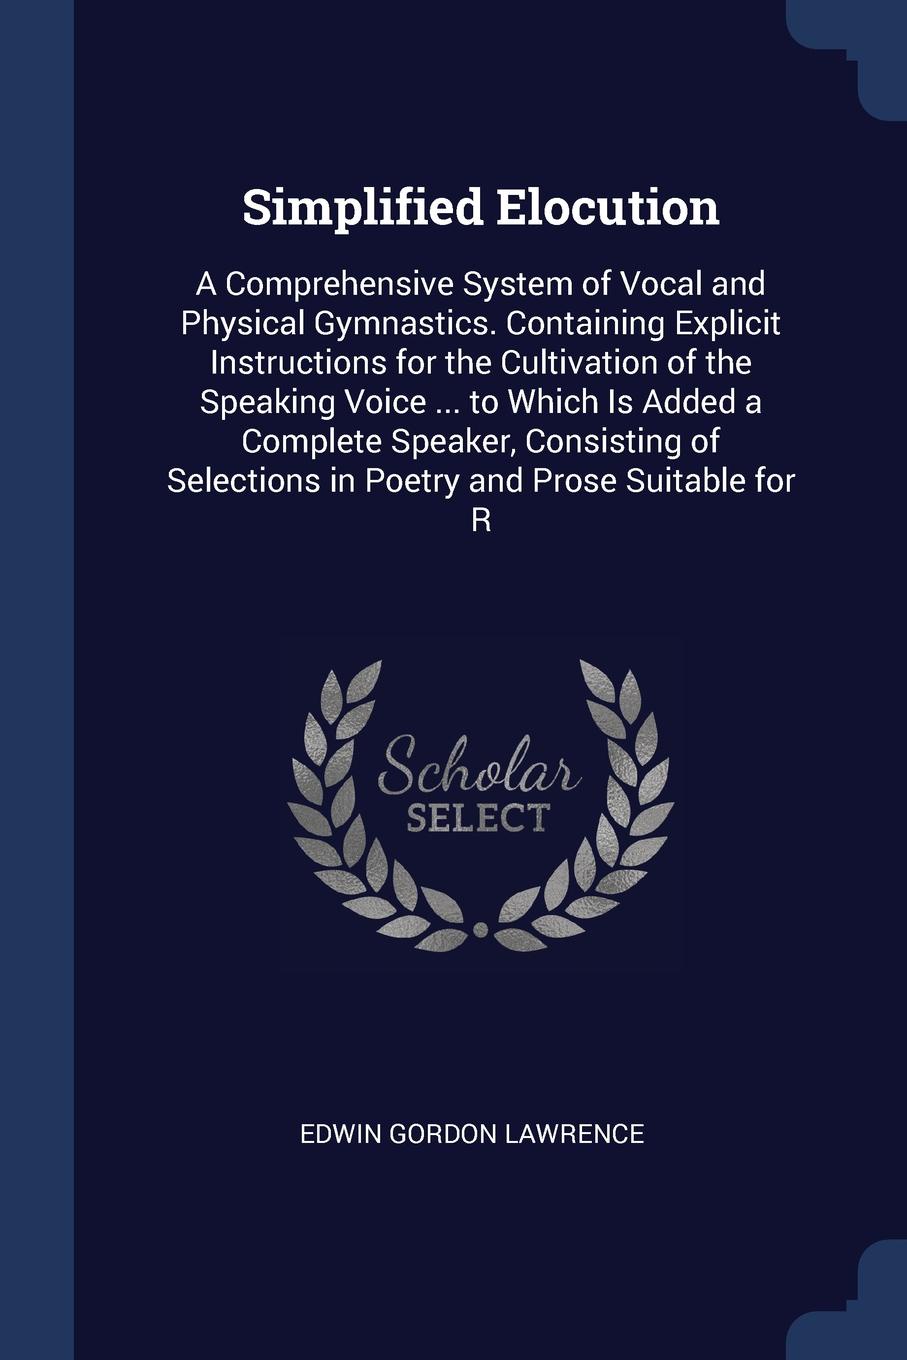 Simplified Elocution. A Comprehensive System of Vocal and Physical Gymnastics. Containing Explicit Instructions for the Cultivation of the Speaking Voice ... to Which Is Added a Complete Speaker, Consisting of Selections in Poetry and Prose Suitab...